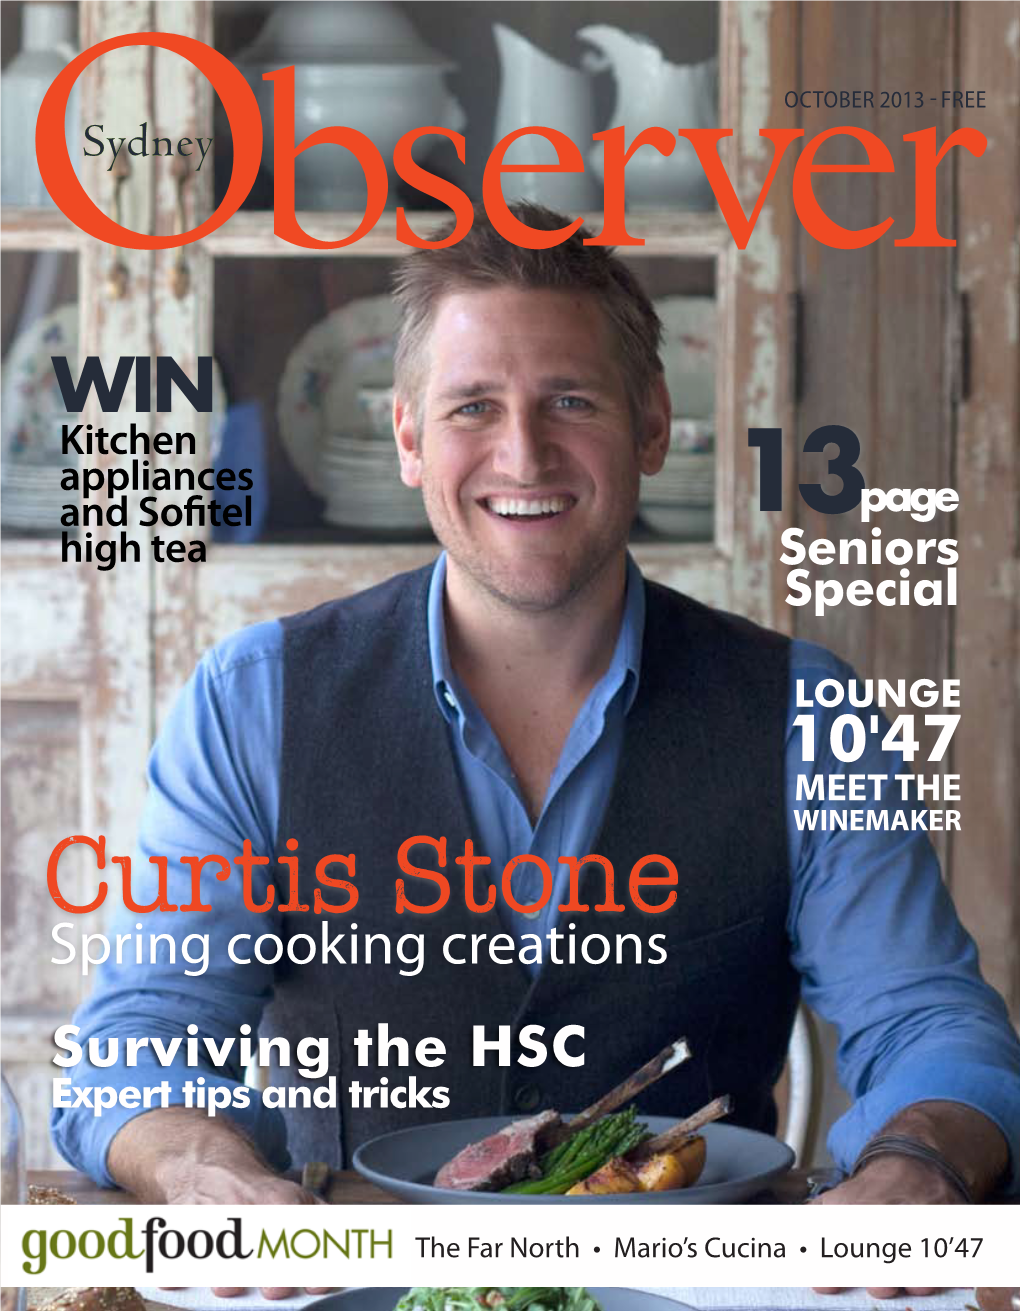 Curtis Stone Spring Cooking Creations Surviving the HSC Expert Tips and Tricks